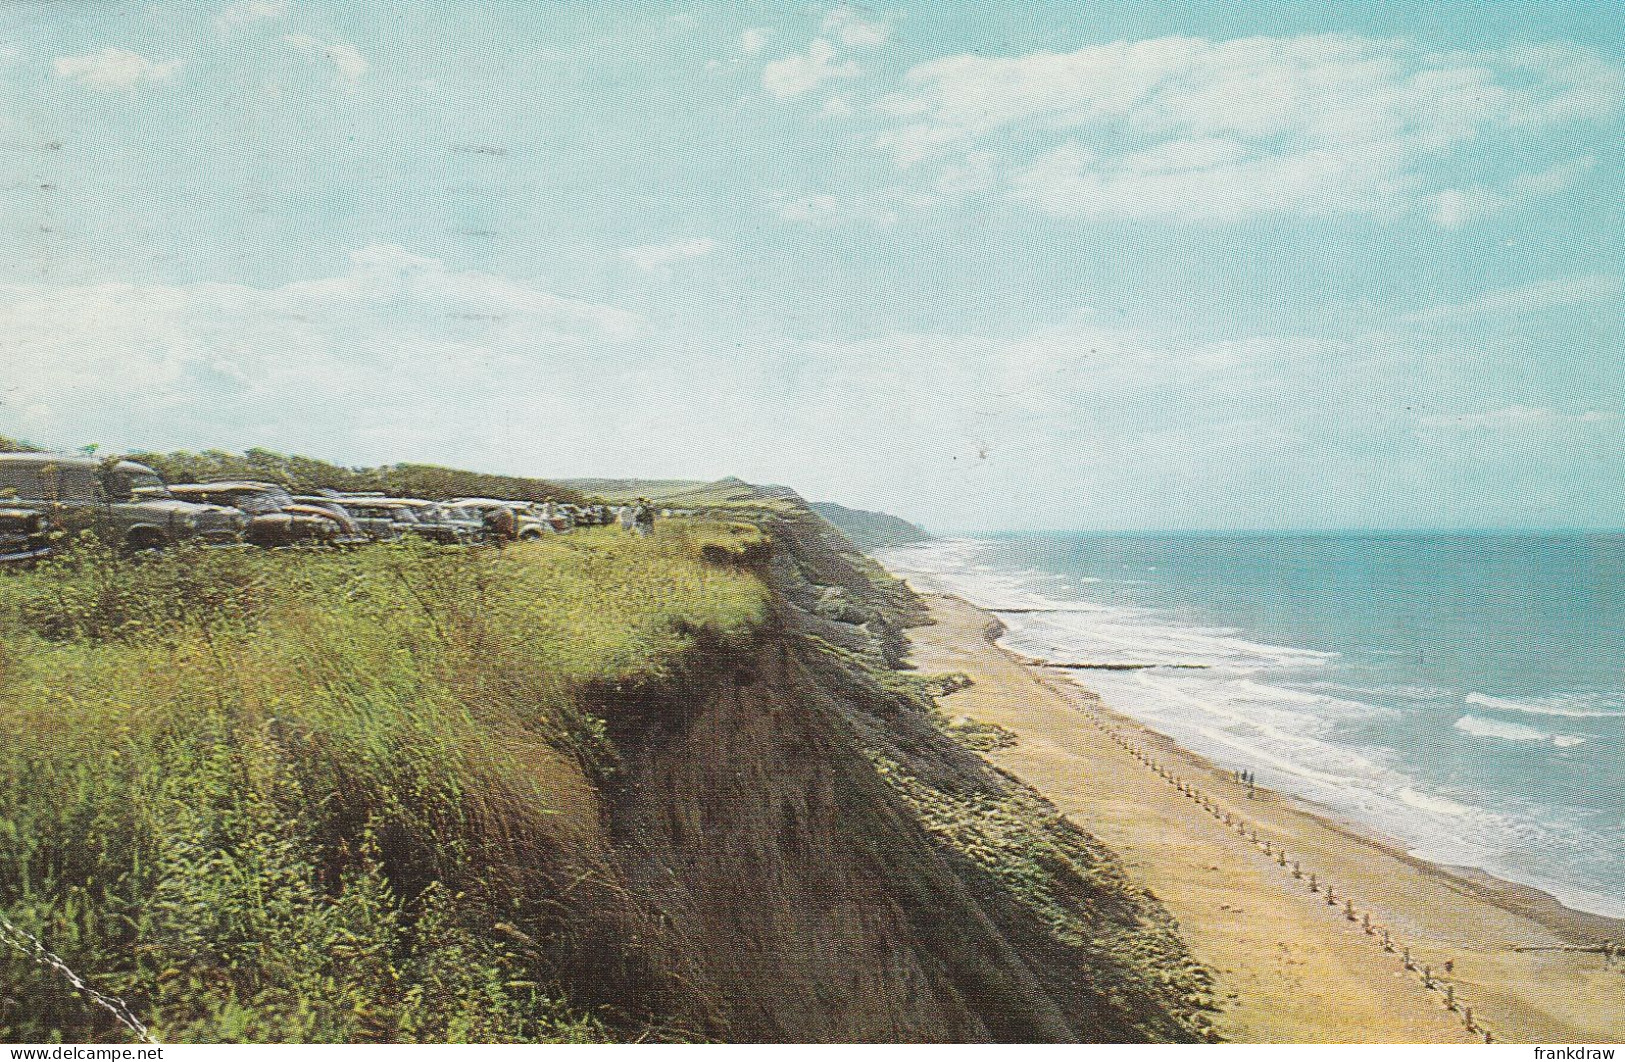 Postcard - West Cliff, Overstrand - Card No. 100000036a - Posted27th Aug1970 - Very Good - Non Classés